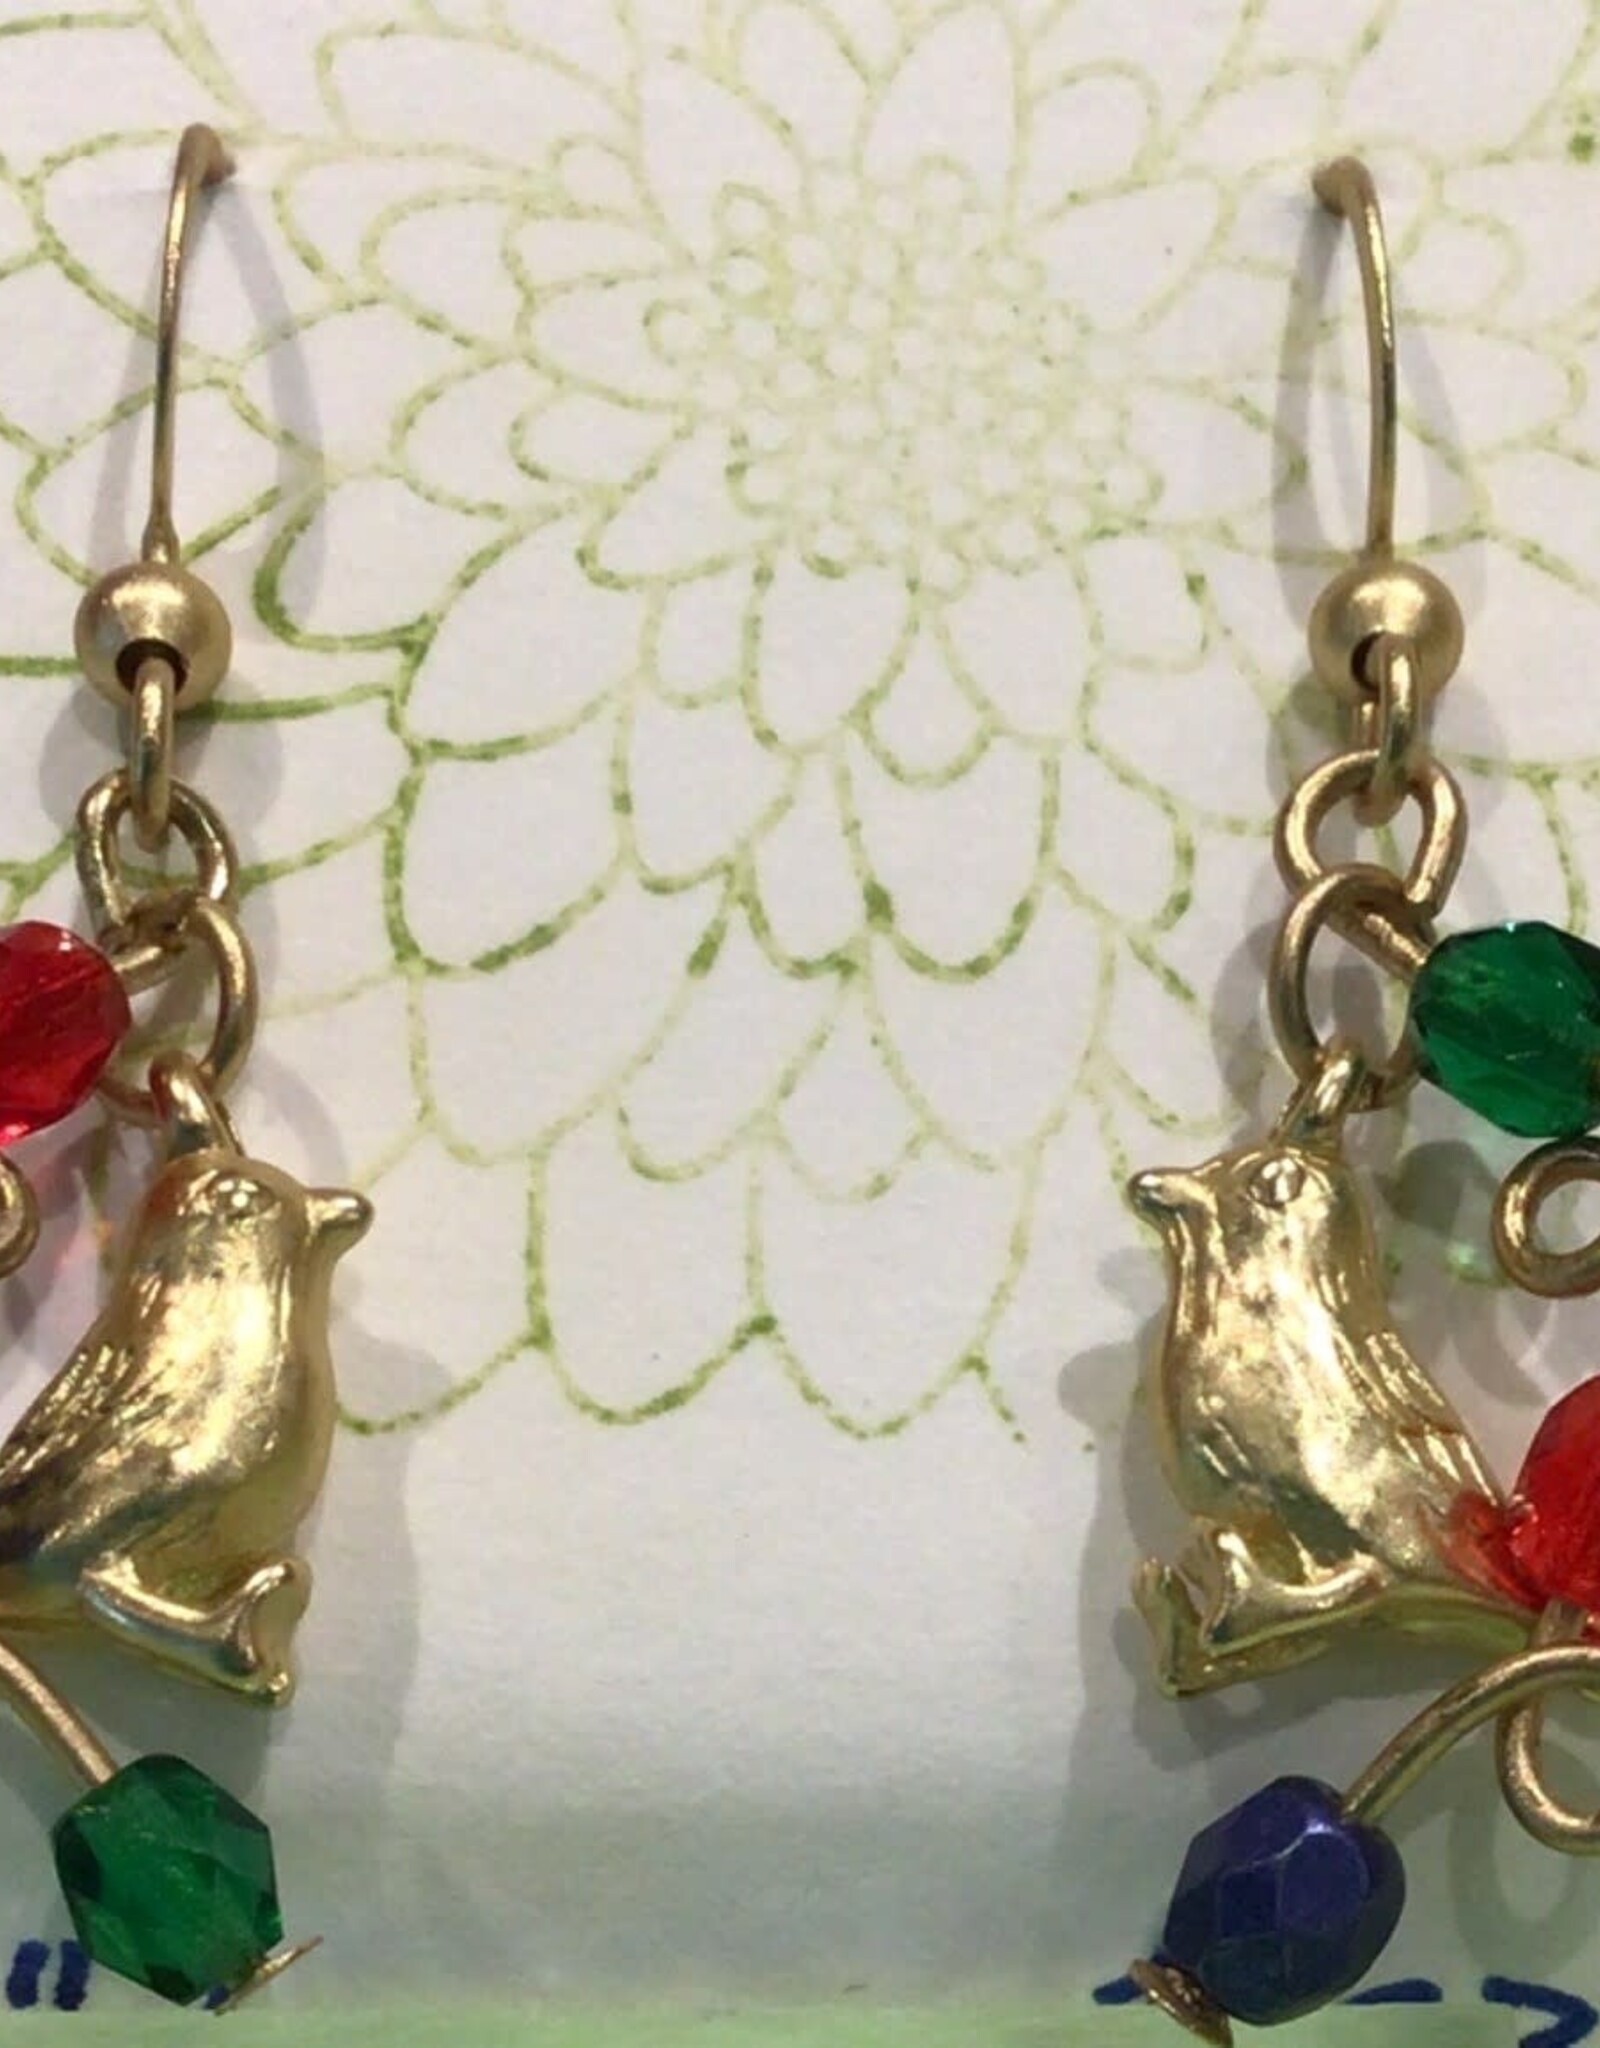 Painted Bunting Earrings with Czech Glass